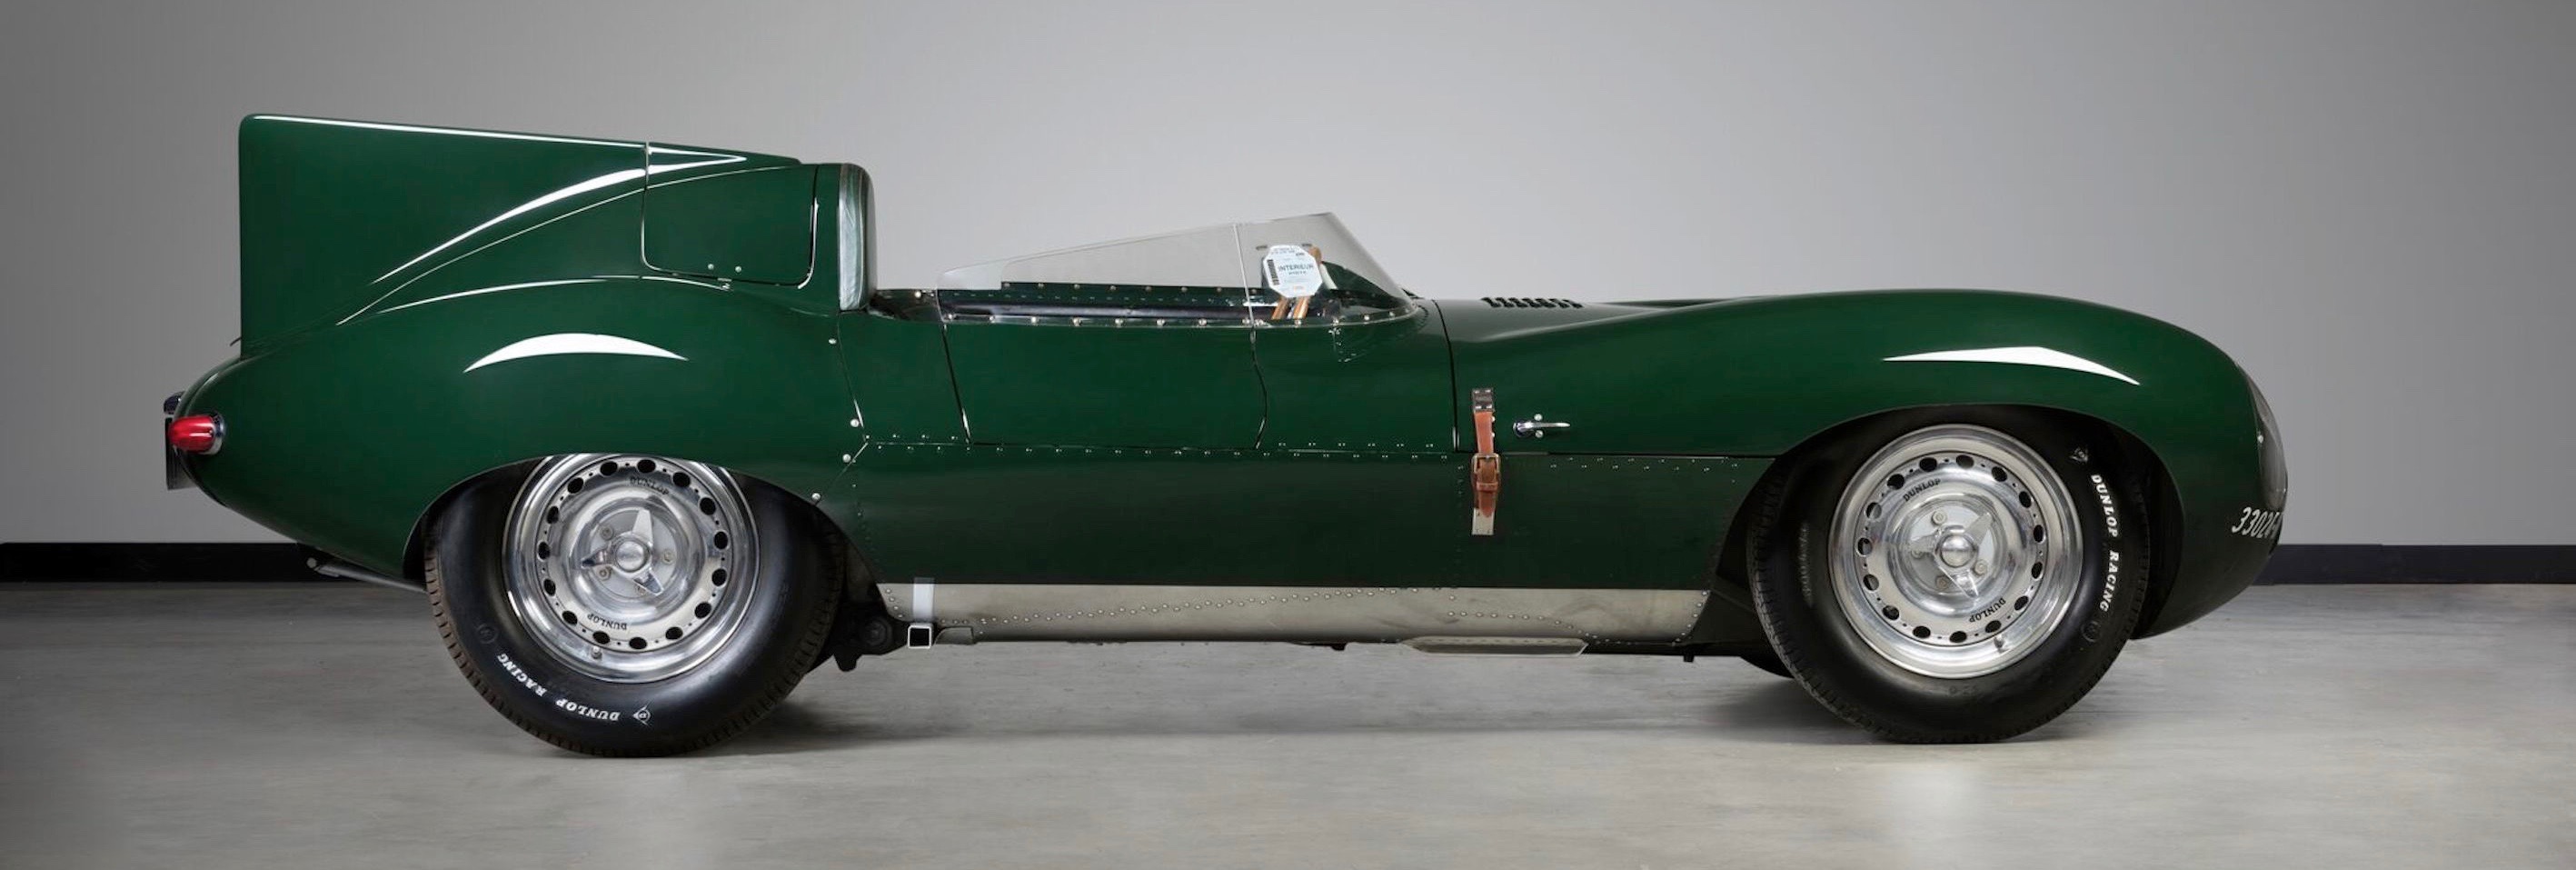 , Australian auction lands a D-type with gripping history, ClassicCars.com Journal